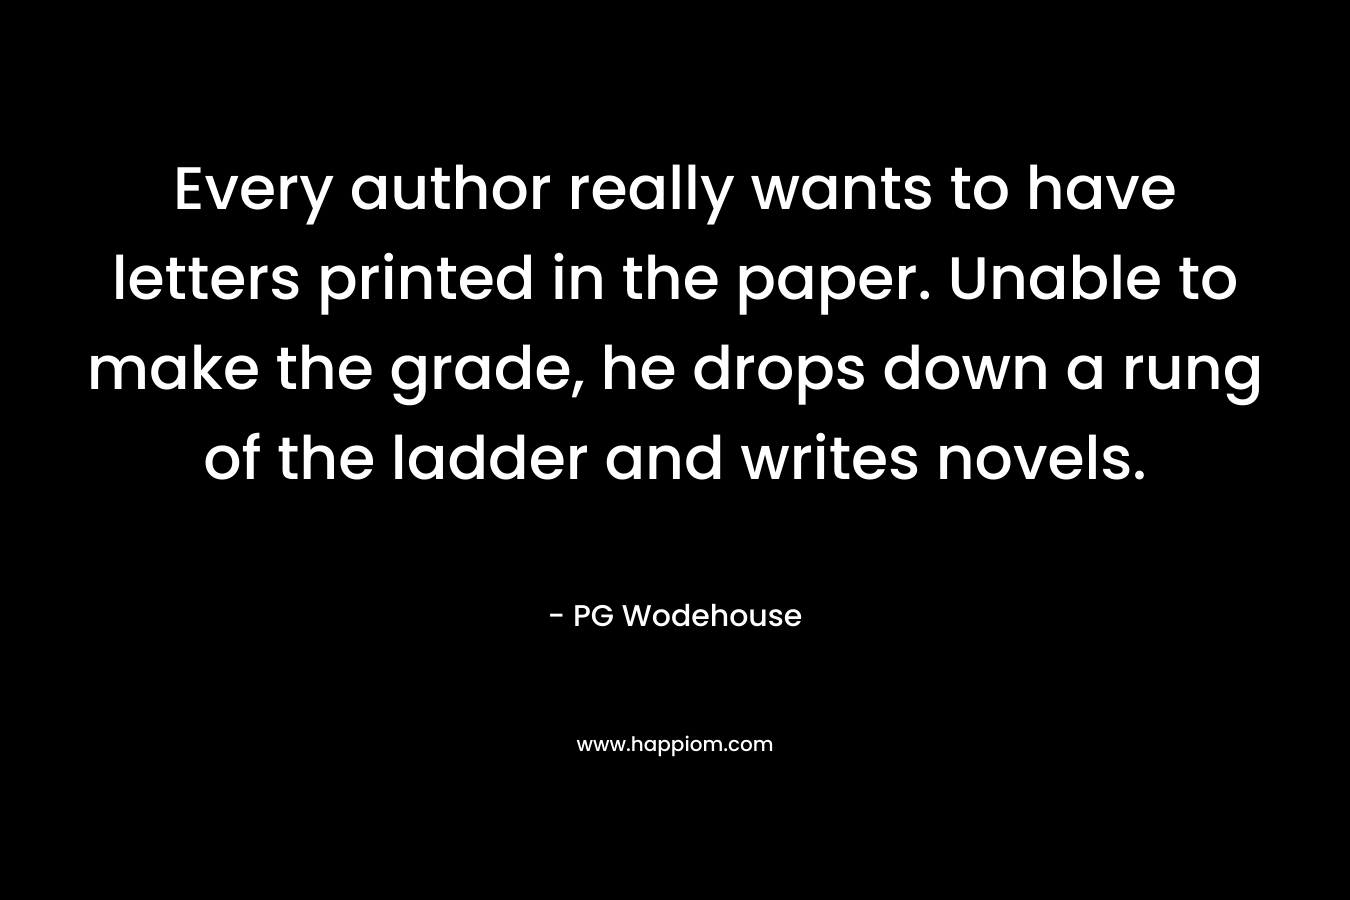 Every author really wants to have letters printed in the paper. Unable to make the grade, he drops down a rung of the ladder and writes novels. – PG Wodehouse